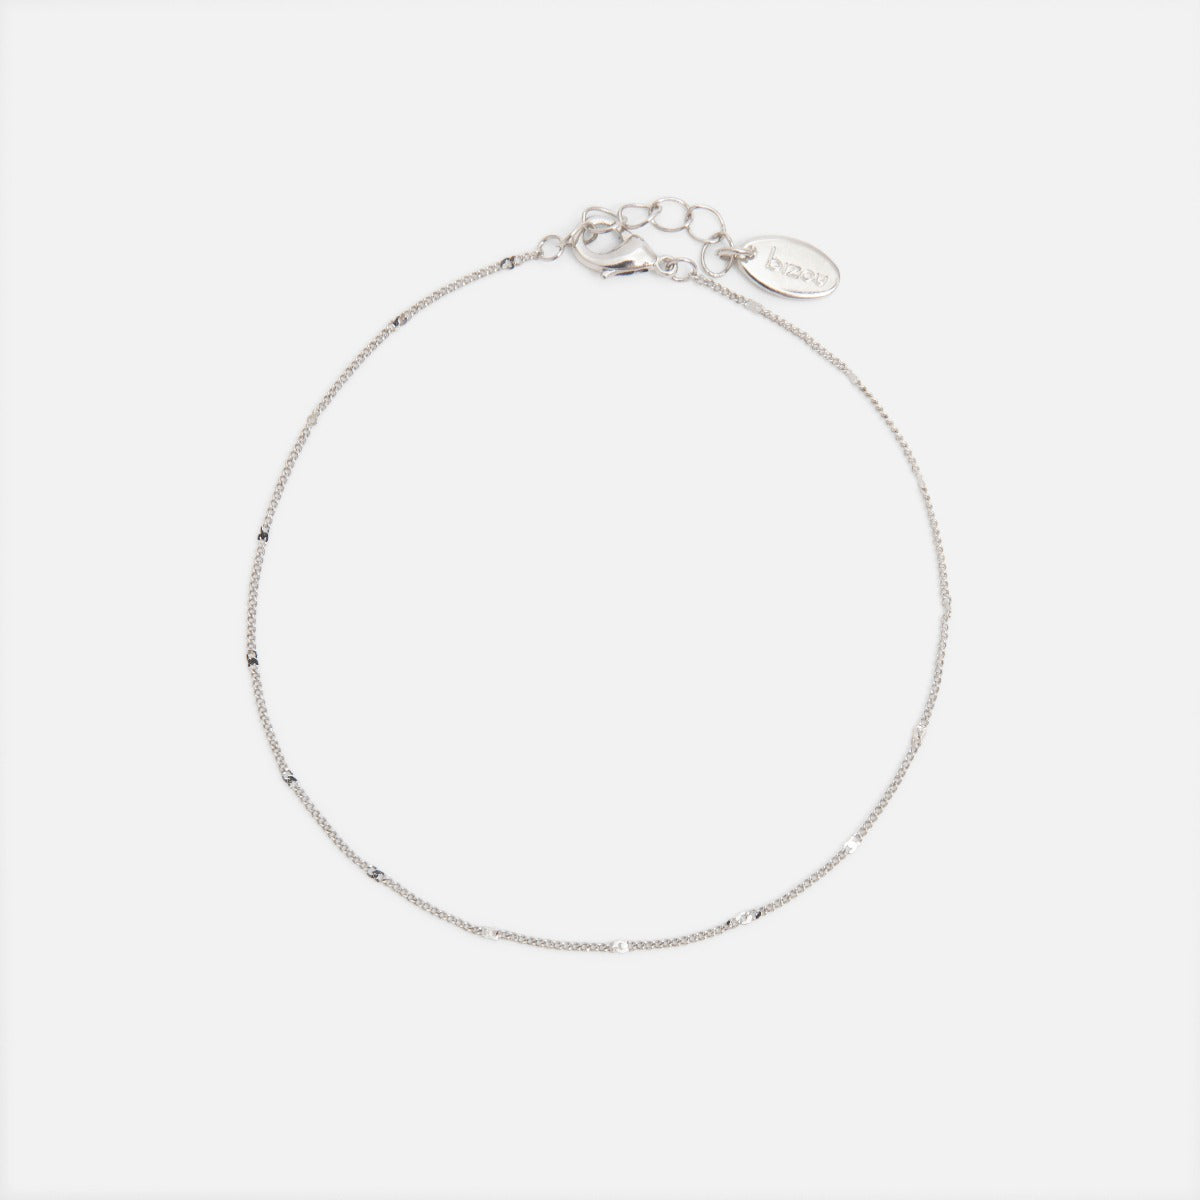 Set of three silvered delicate mesh ankle chains